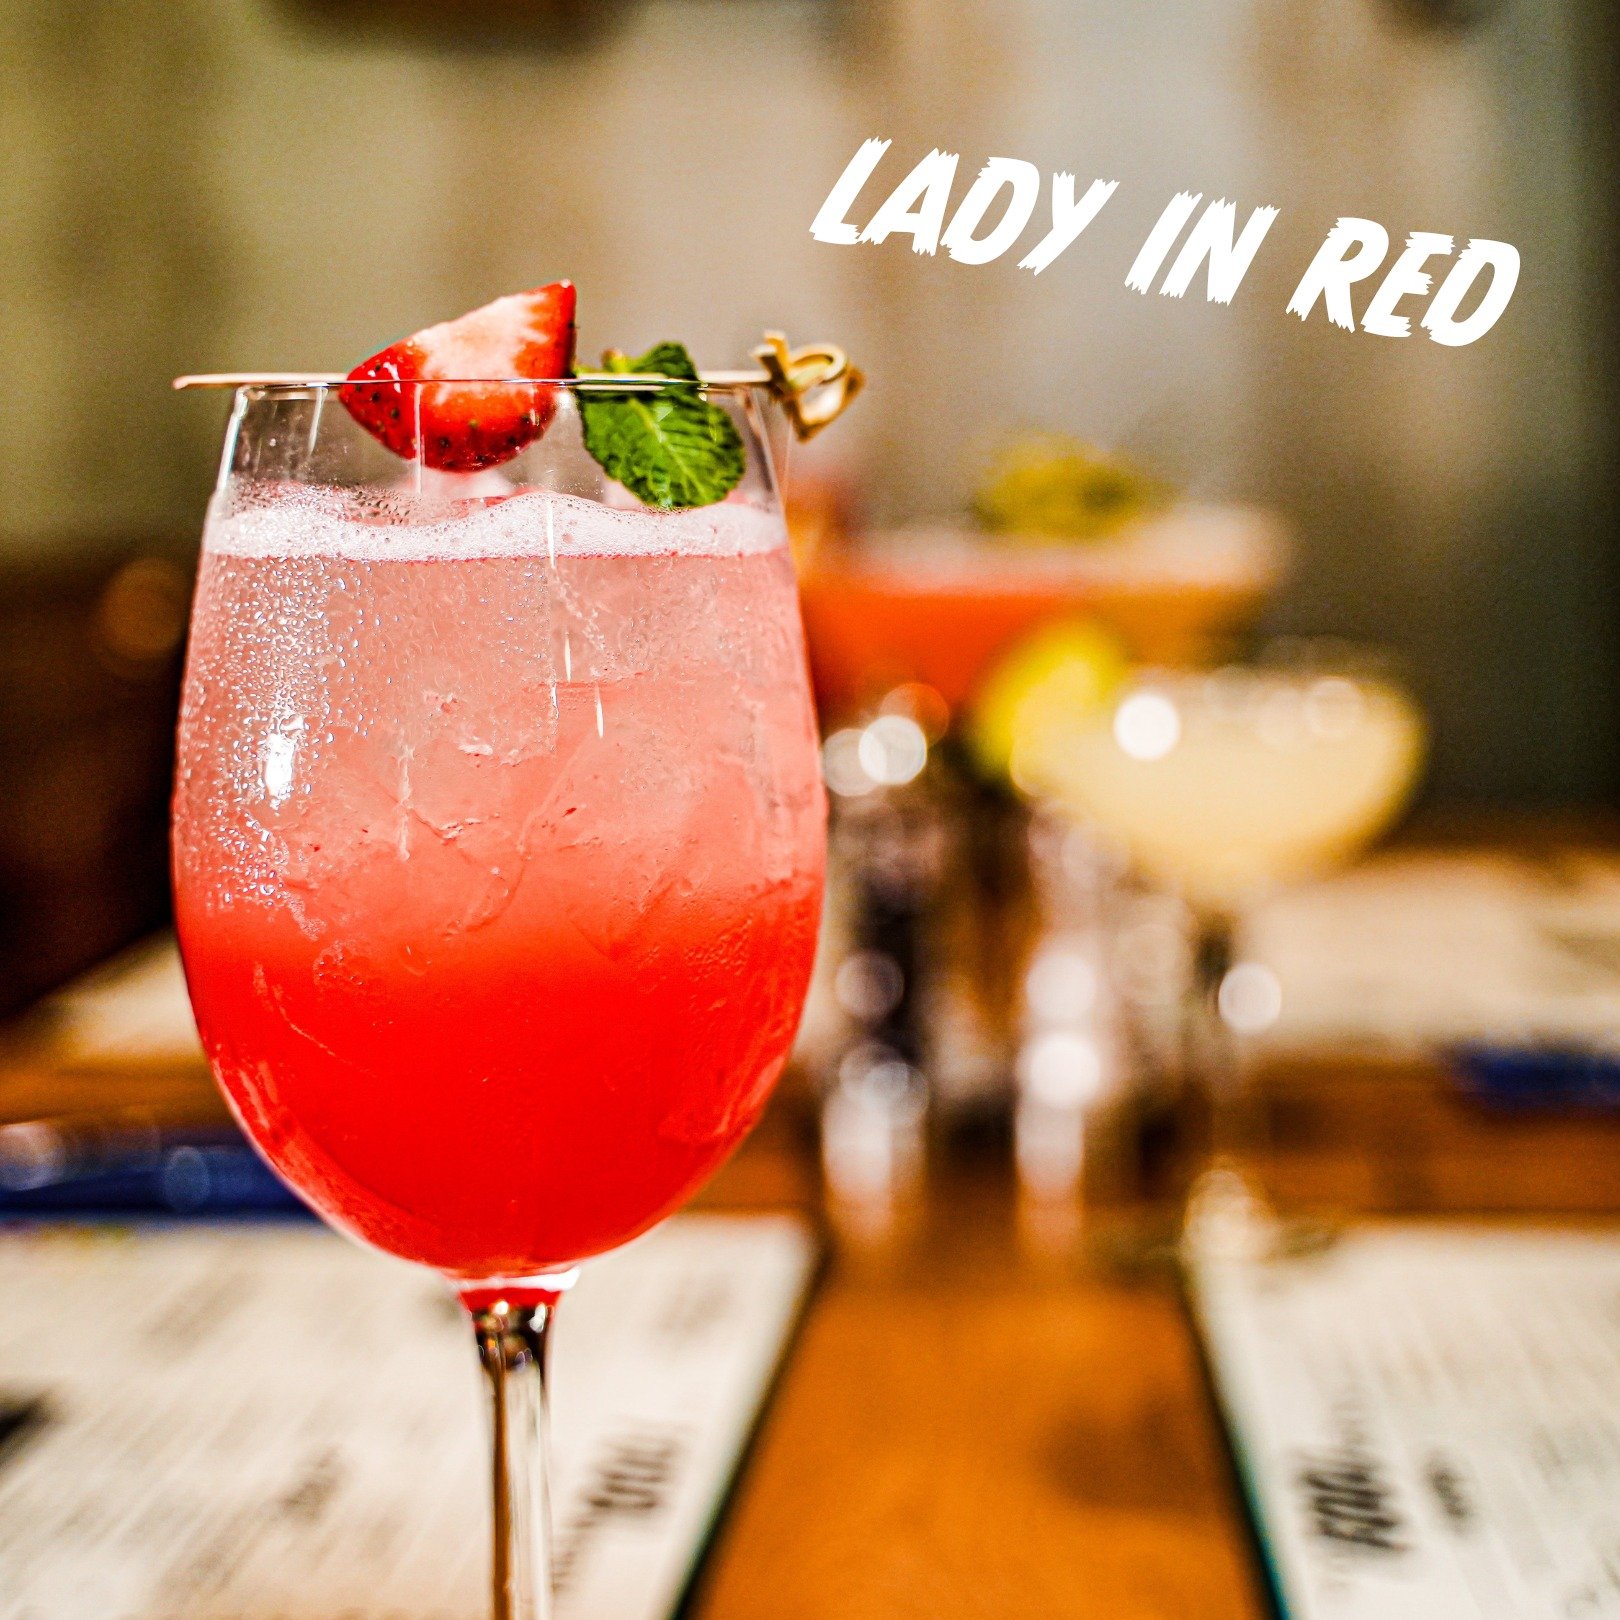 Introducing the captivating &lsquo;Lady in Red&rsquo; cocktail 💃🍹

Part of our NEW collection of spring cocktails, this blend of JJ Pink Gin, cranberry juice, lemon juice, almond syrup, and a splash of Prosecco promises elegance and flavour with ev